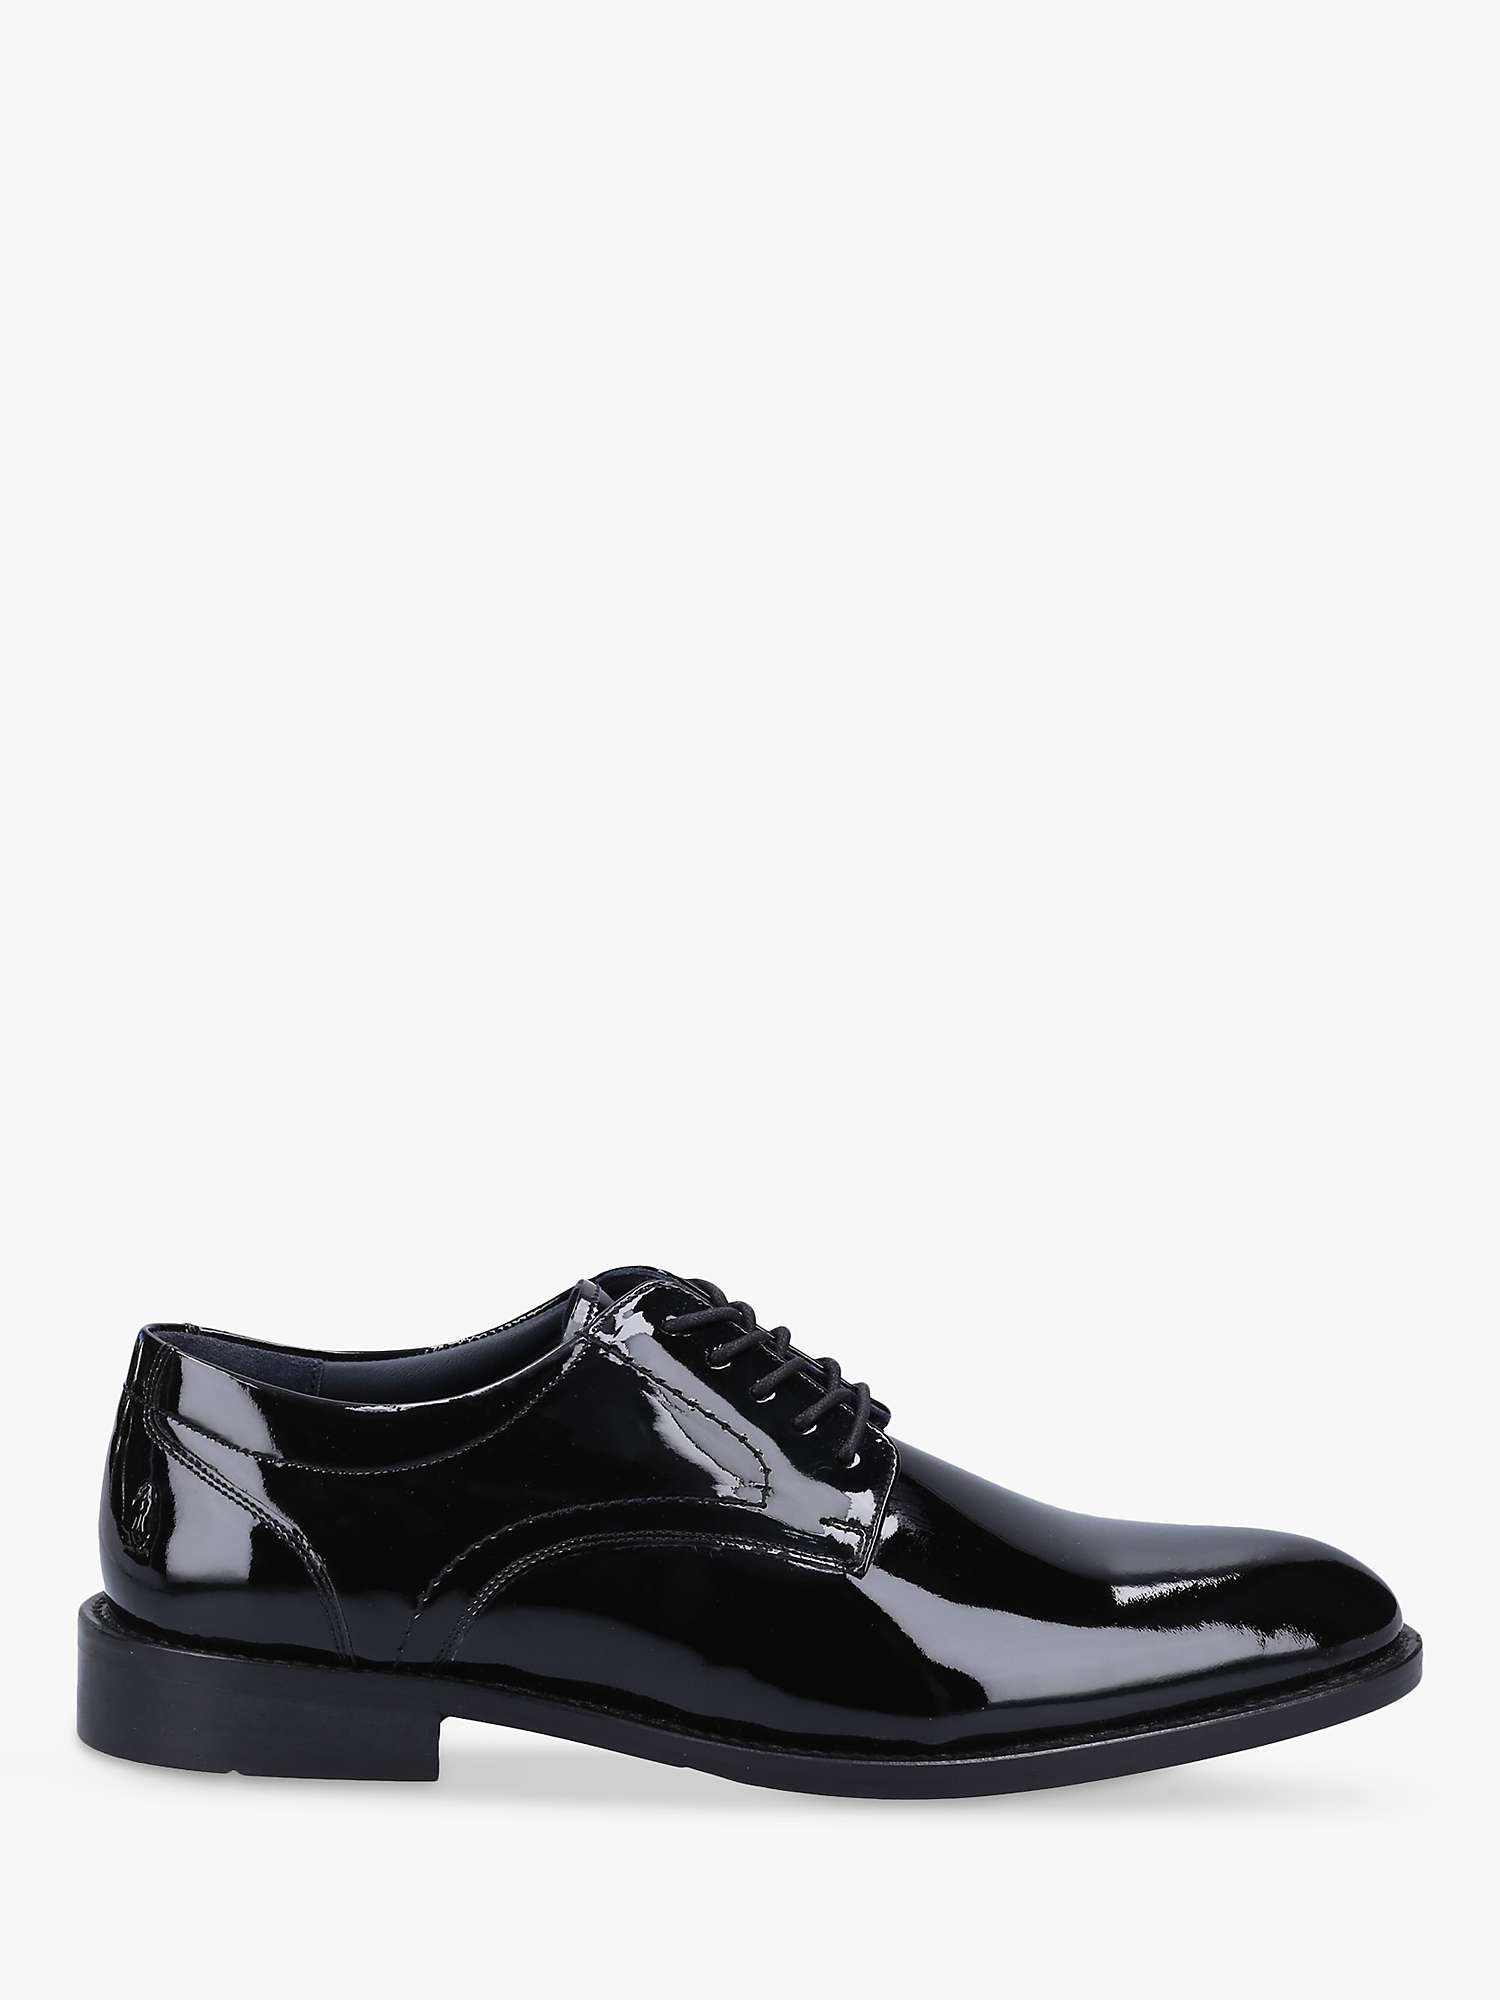 Buy Hush Puppies Damien Patent Leather Lace Up Brogues, Black Online at johnlewis.com